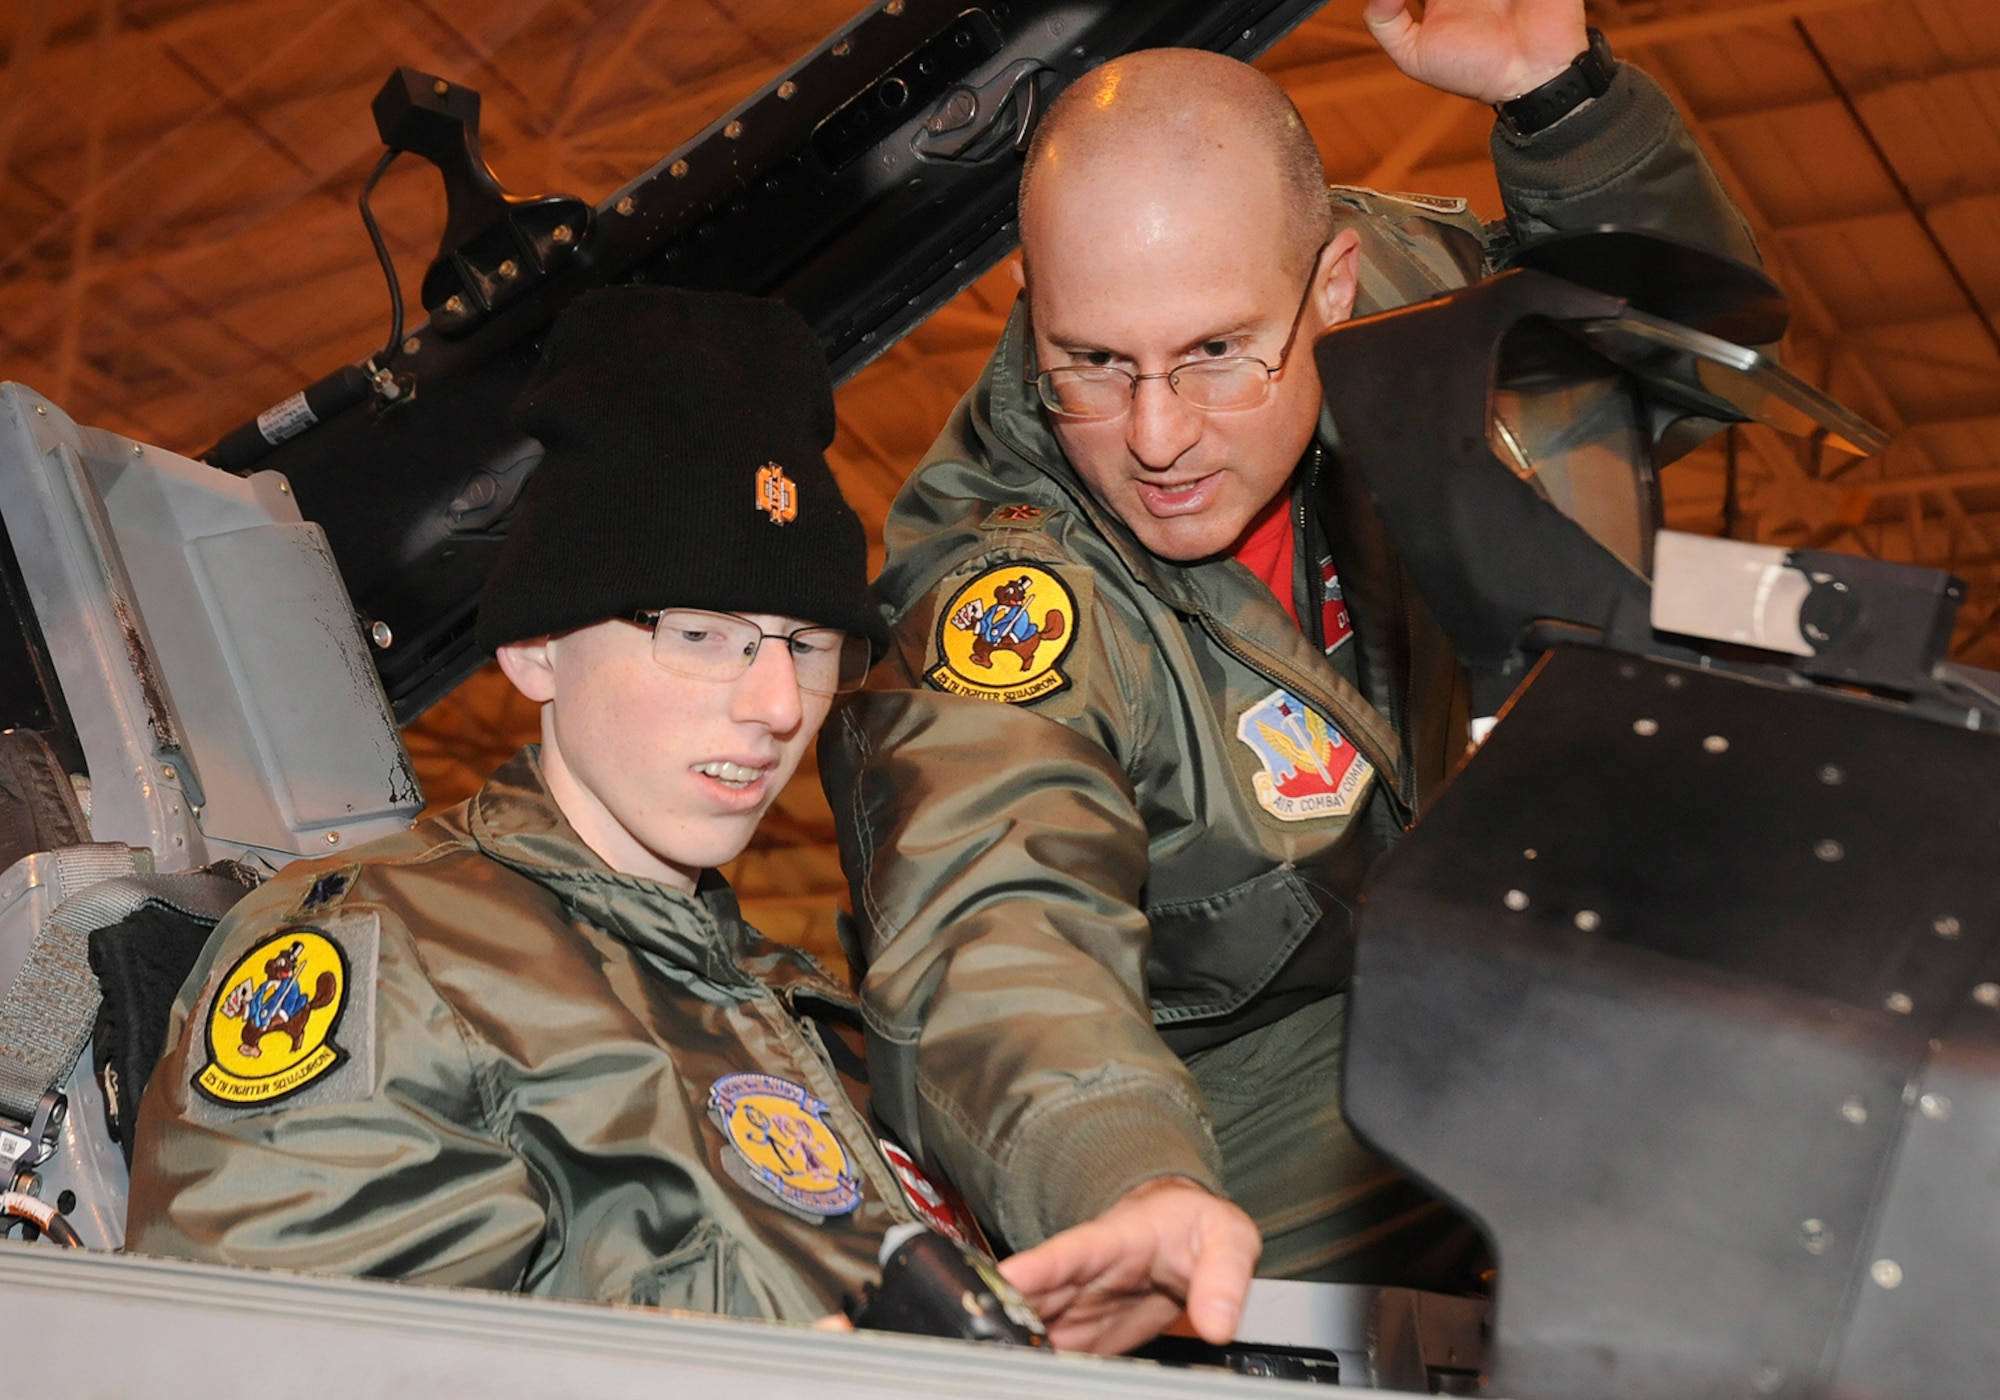 Josh Payton, the 138th Fighter Wing's "pilot for a day" is briefed on the cockpit functionality of an F-16 by Maj. Michael "Deuce" Scorsone Feb. 19, 2015, at the Tulsa Air National Guard base, Tulsa, Okla.  The pilot for a day program is intended to recognize and honor children with potentially life threatening illnesses and started at the 138th in May 2012, and has hosted seven children since it began.  (U.S. National Guard photo by Senior Master Sgt.  Preston L. Chasteen/Released)